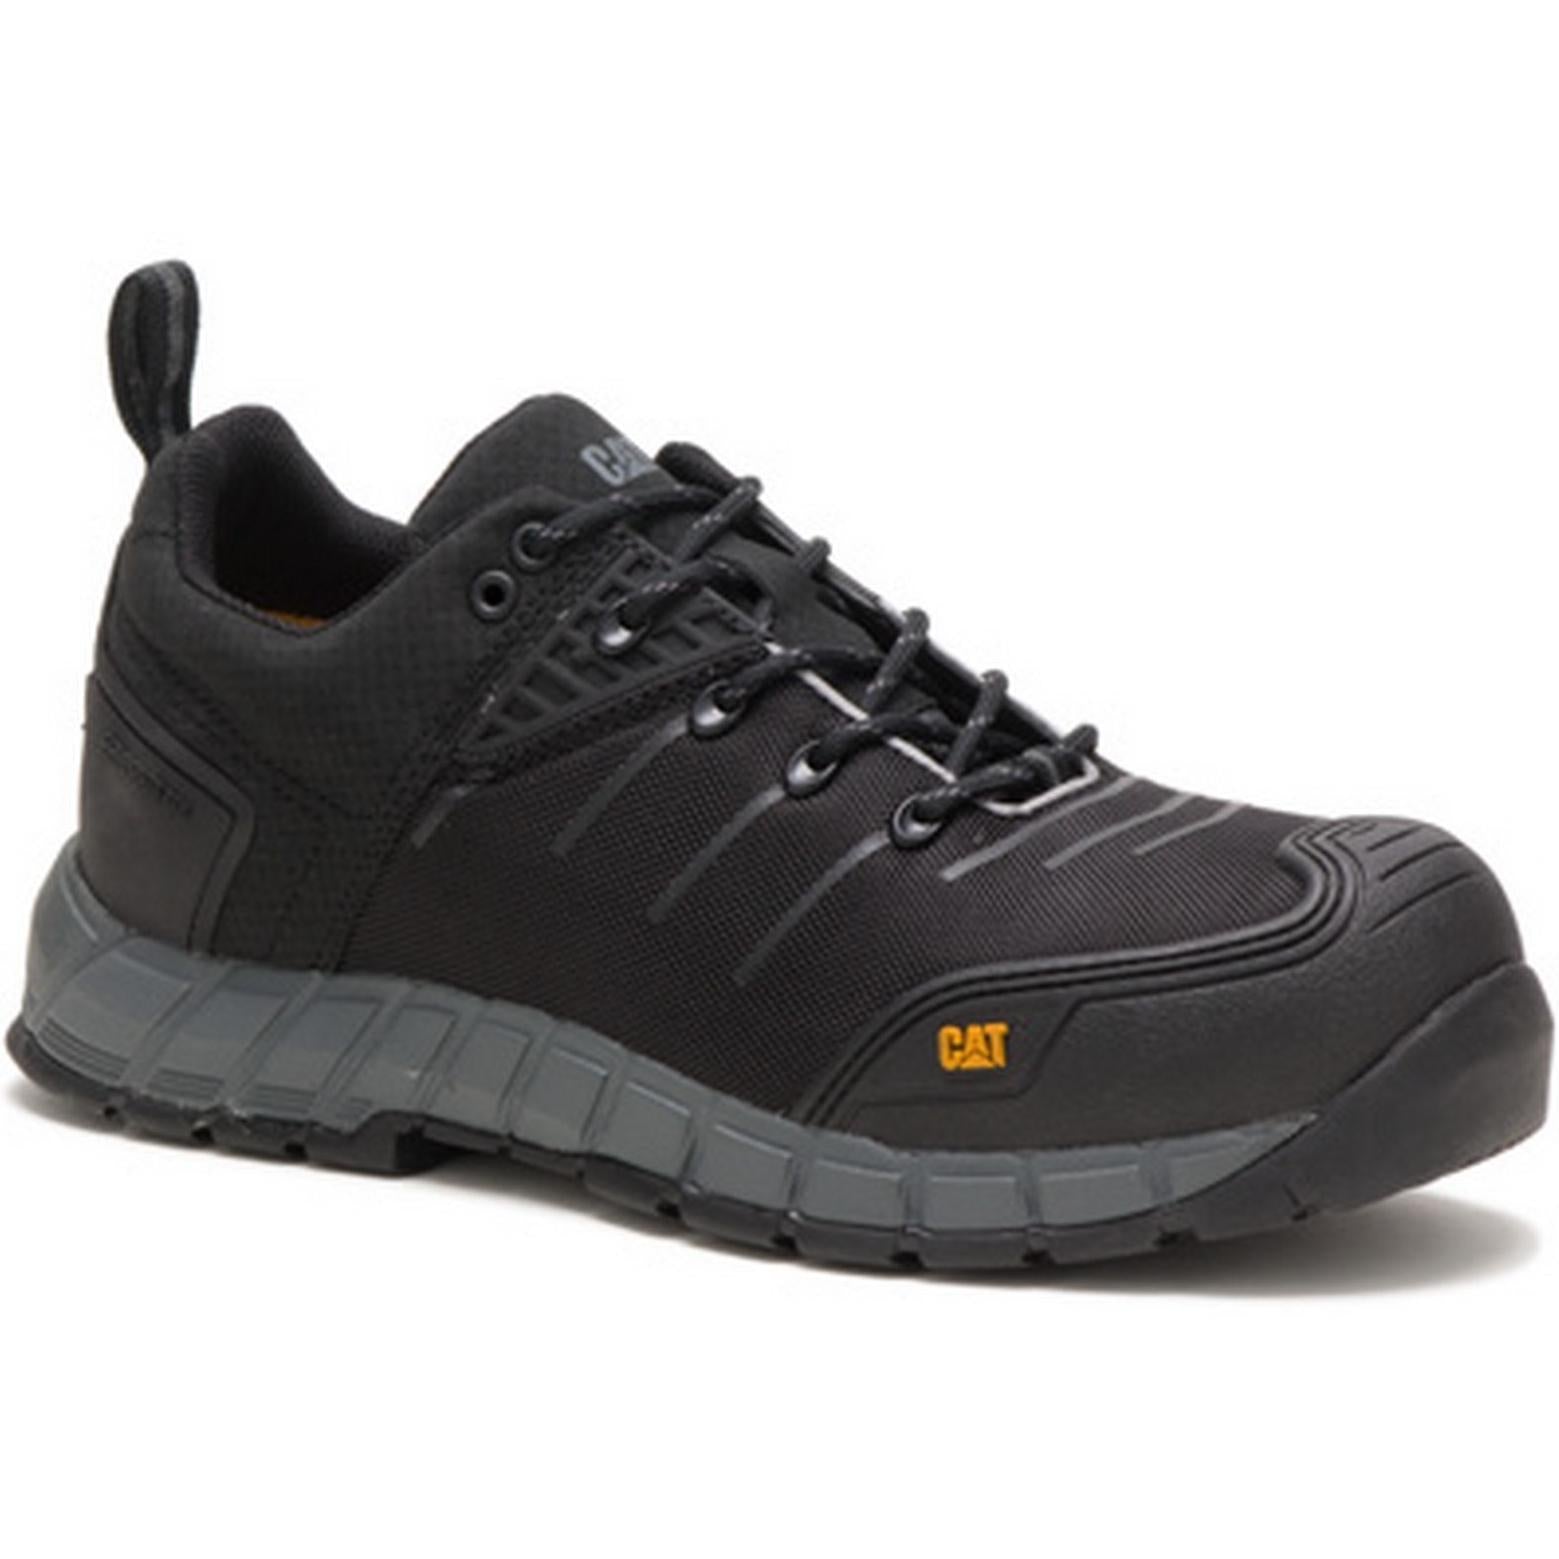 Caterpillar Byway Lace Up Safety Shoe